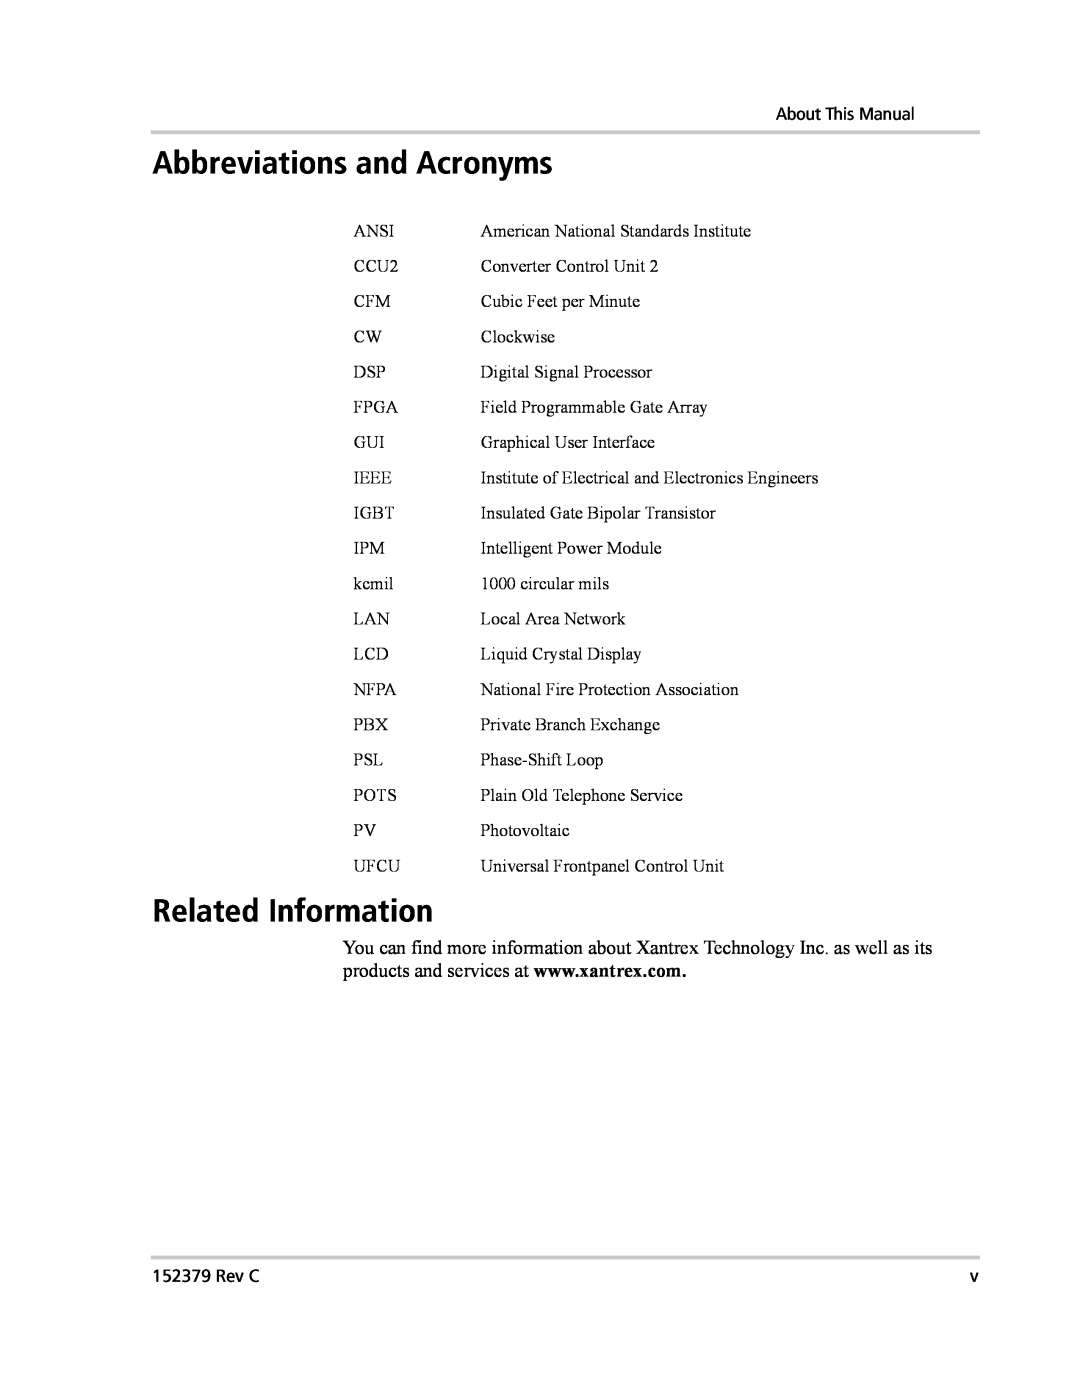 Xantrex Technology PV100S-208 manual Abbreviations and Acronyms, Related Information 